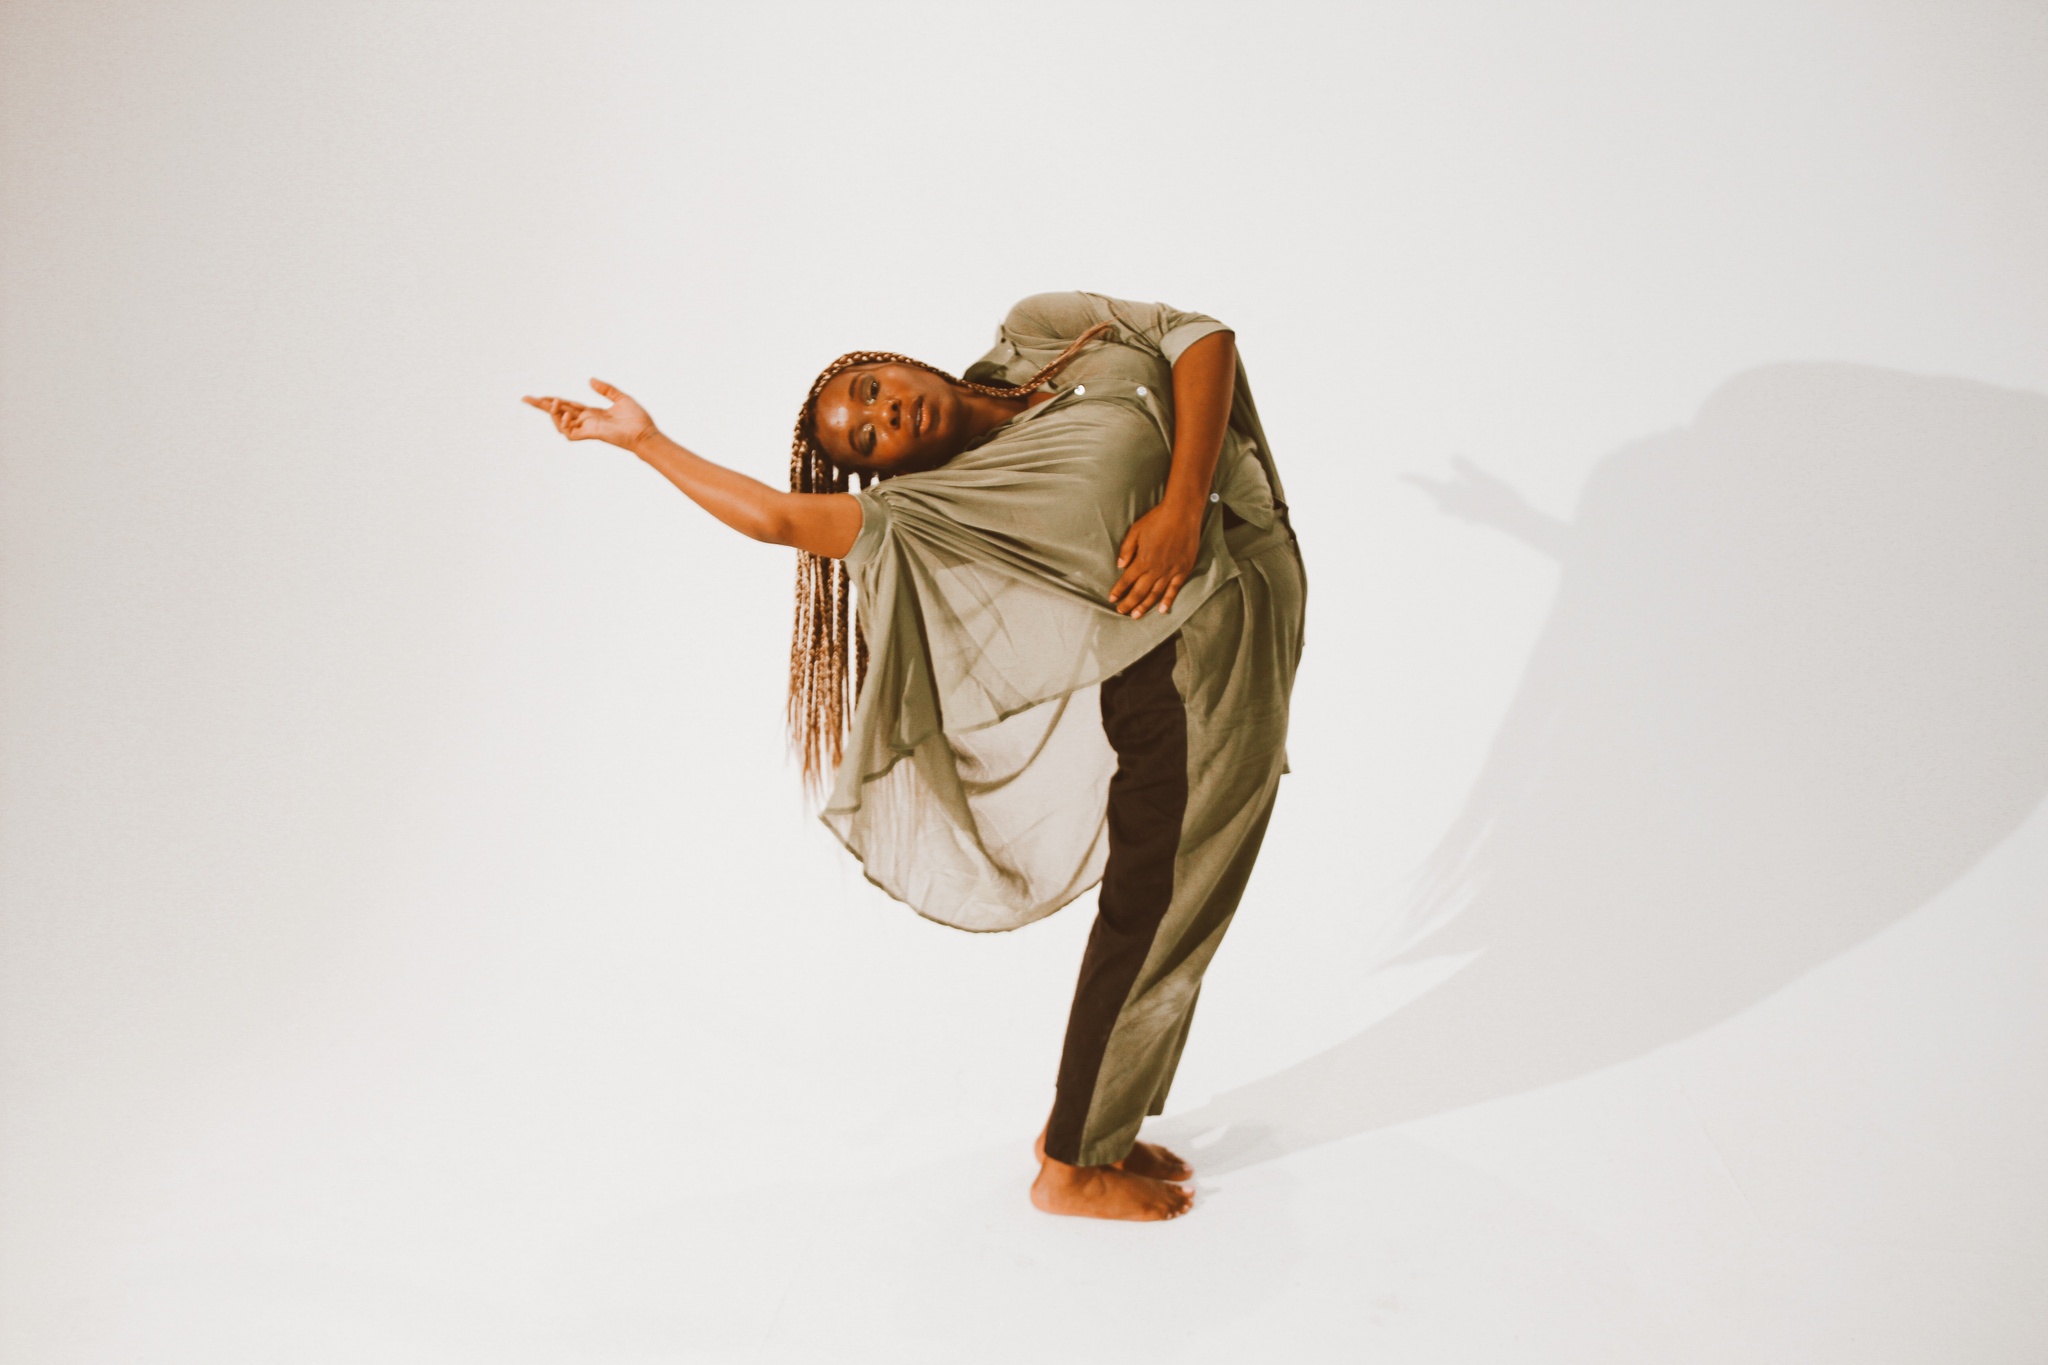 A Black person with long braids bends over backward with one hand outstretched away from their head and body. They wear a draped, sheer fatigue green blouse and pose in what appears to be a photographer's studio with a blank, neutral backdrop.